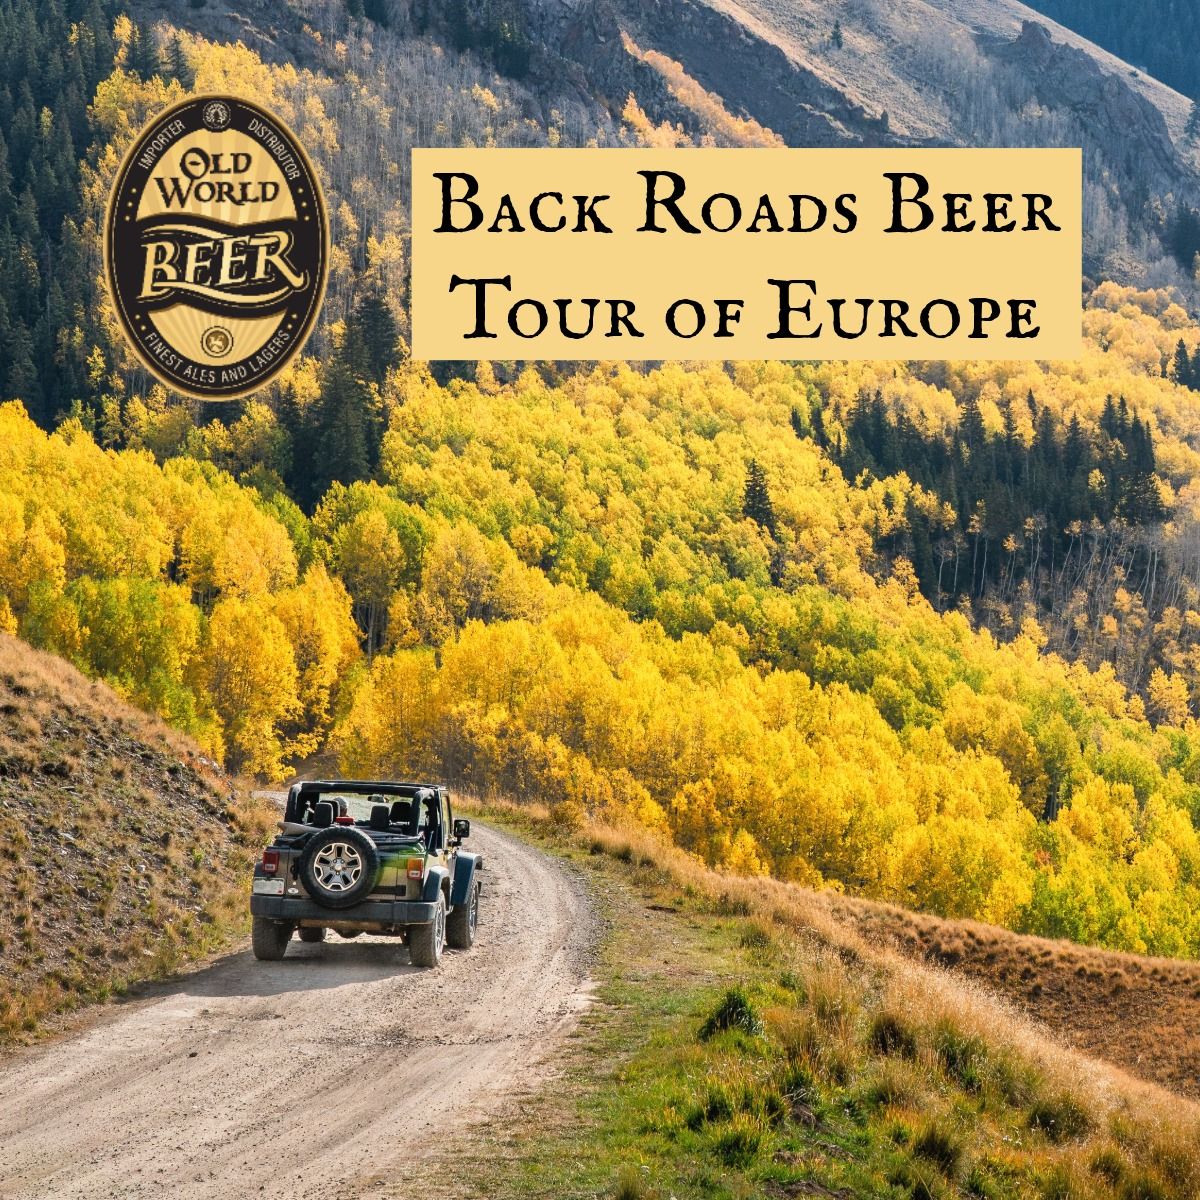 Back Roads Beer Tour of Europe